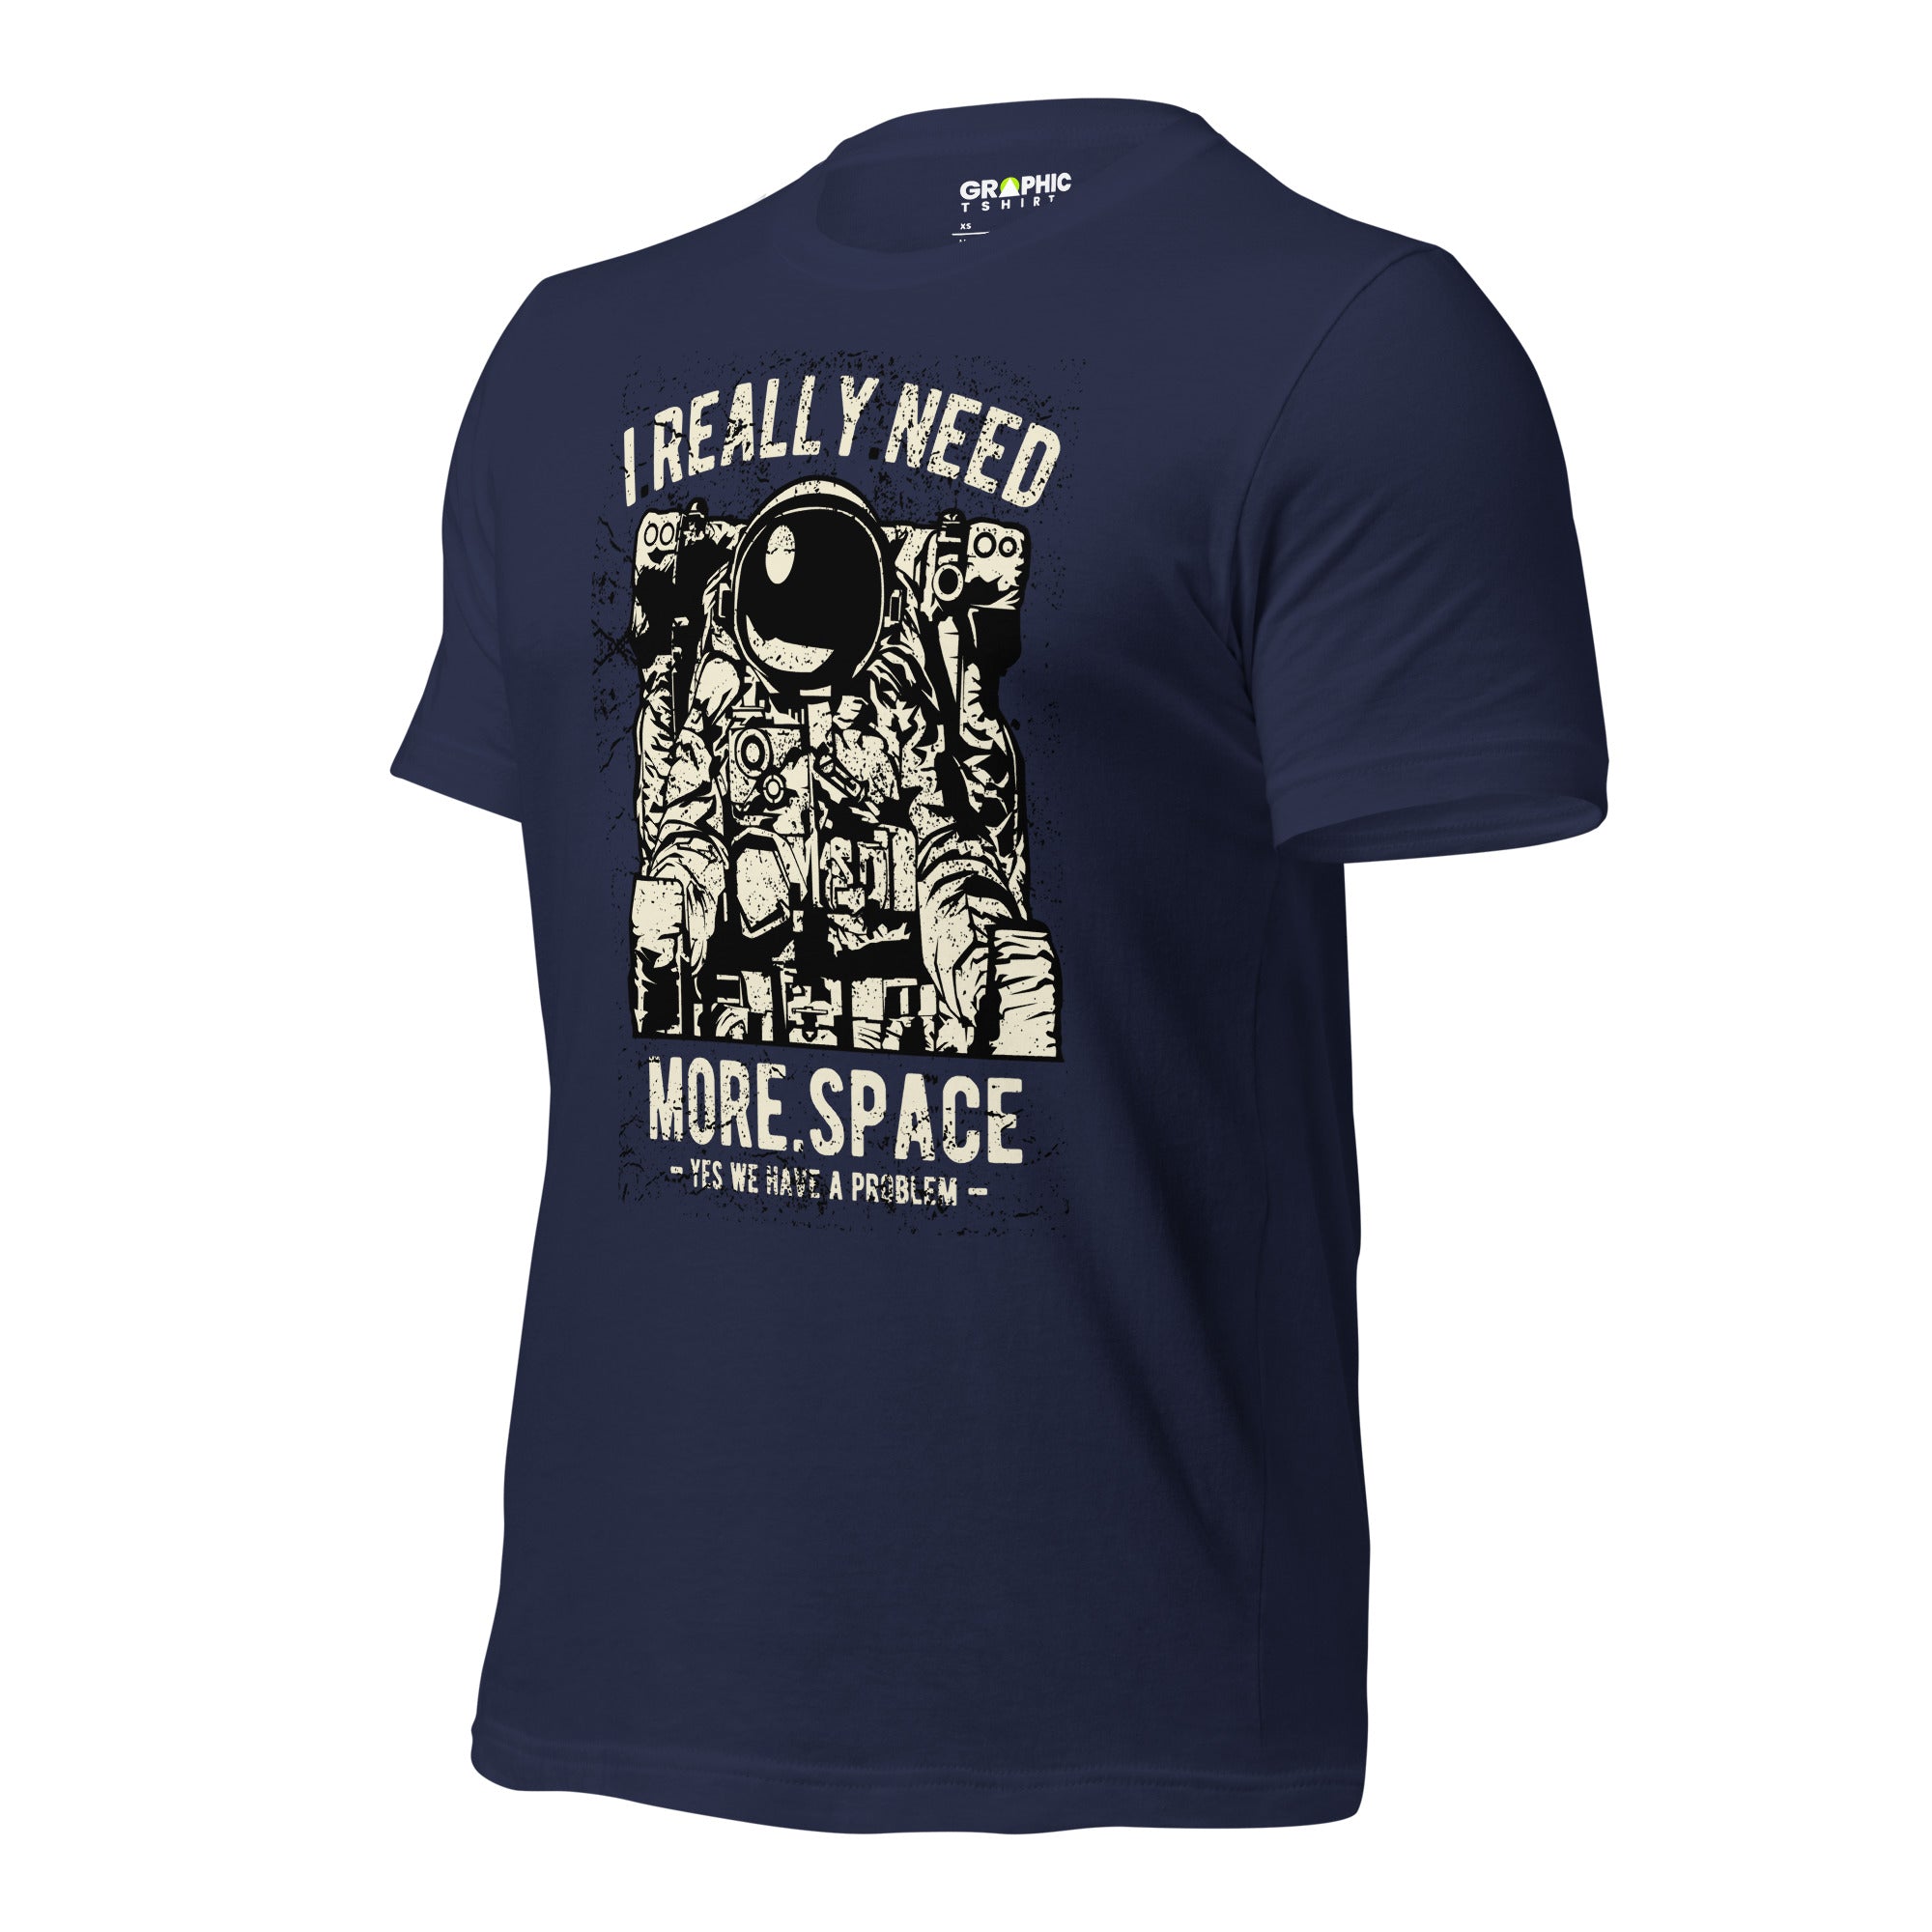 Men's Staple T-Shirt - I Really Need More Space Yes We Have A Problem - GRAPHIC T-SHIRTS